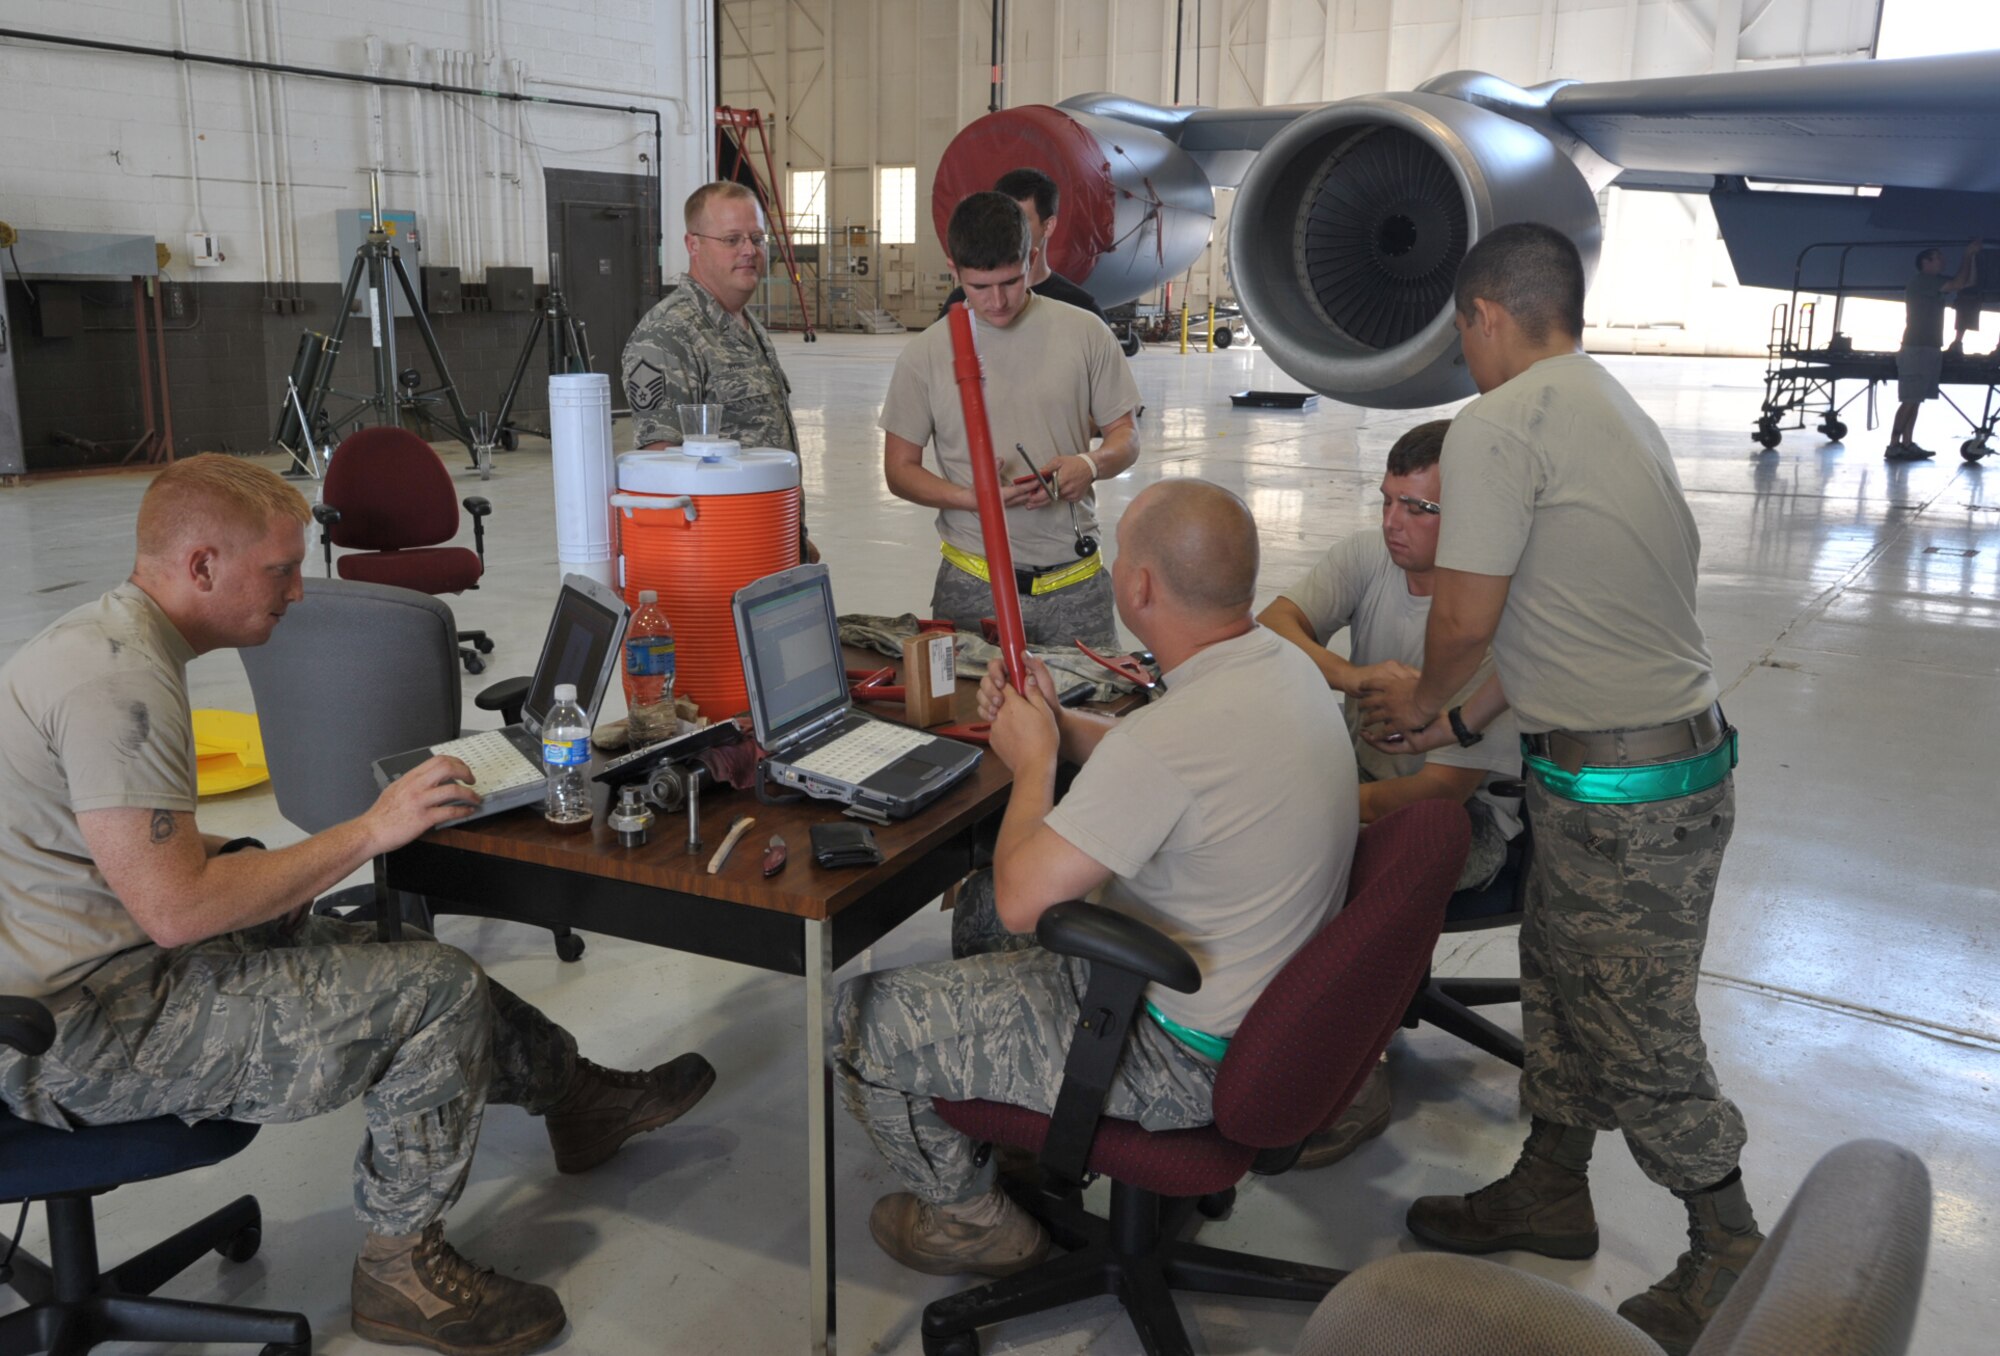 Master Sgt. Al Ryder (top left) talks with some active-duty Airmen assigned to a maintenance team preparing for Air Mobility Rodeo 2009. Sergeant Ryder is a Reservist assigned to the 931st Aircraft Maintenance Squadron. A "blended" team of Reserve and Regular (activ-duty) Airmen from McConnell are preparing for the biennial readiness competition for the first time. (U.S. Air Force photo/Tech. Sgt. Jason Schaap)